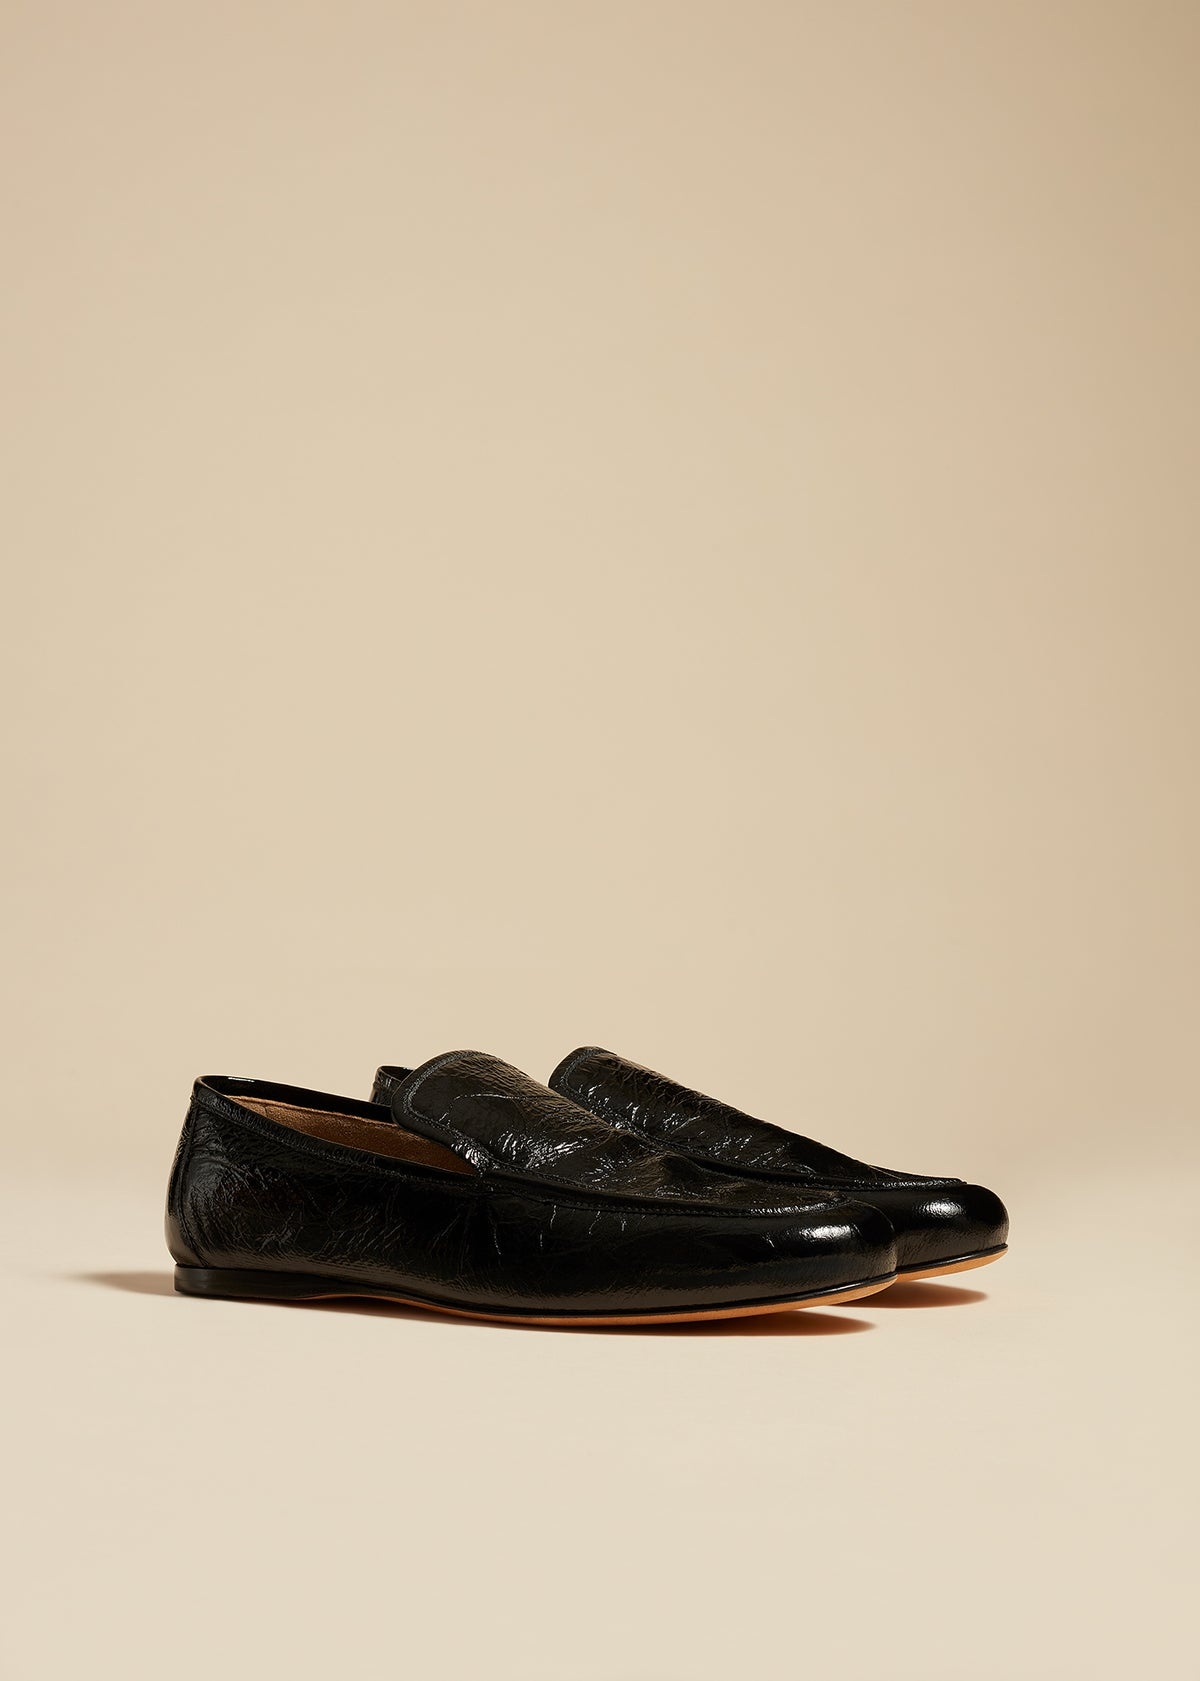 The Alessia Loafer in Black Crinkled Leather - 1